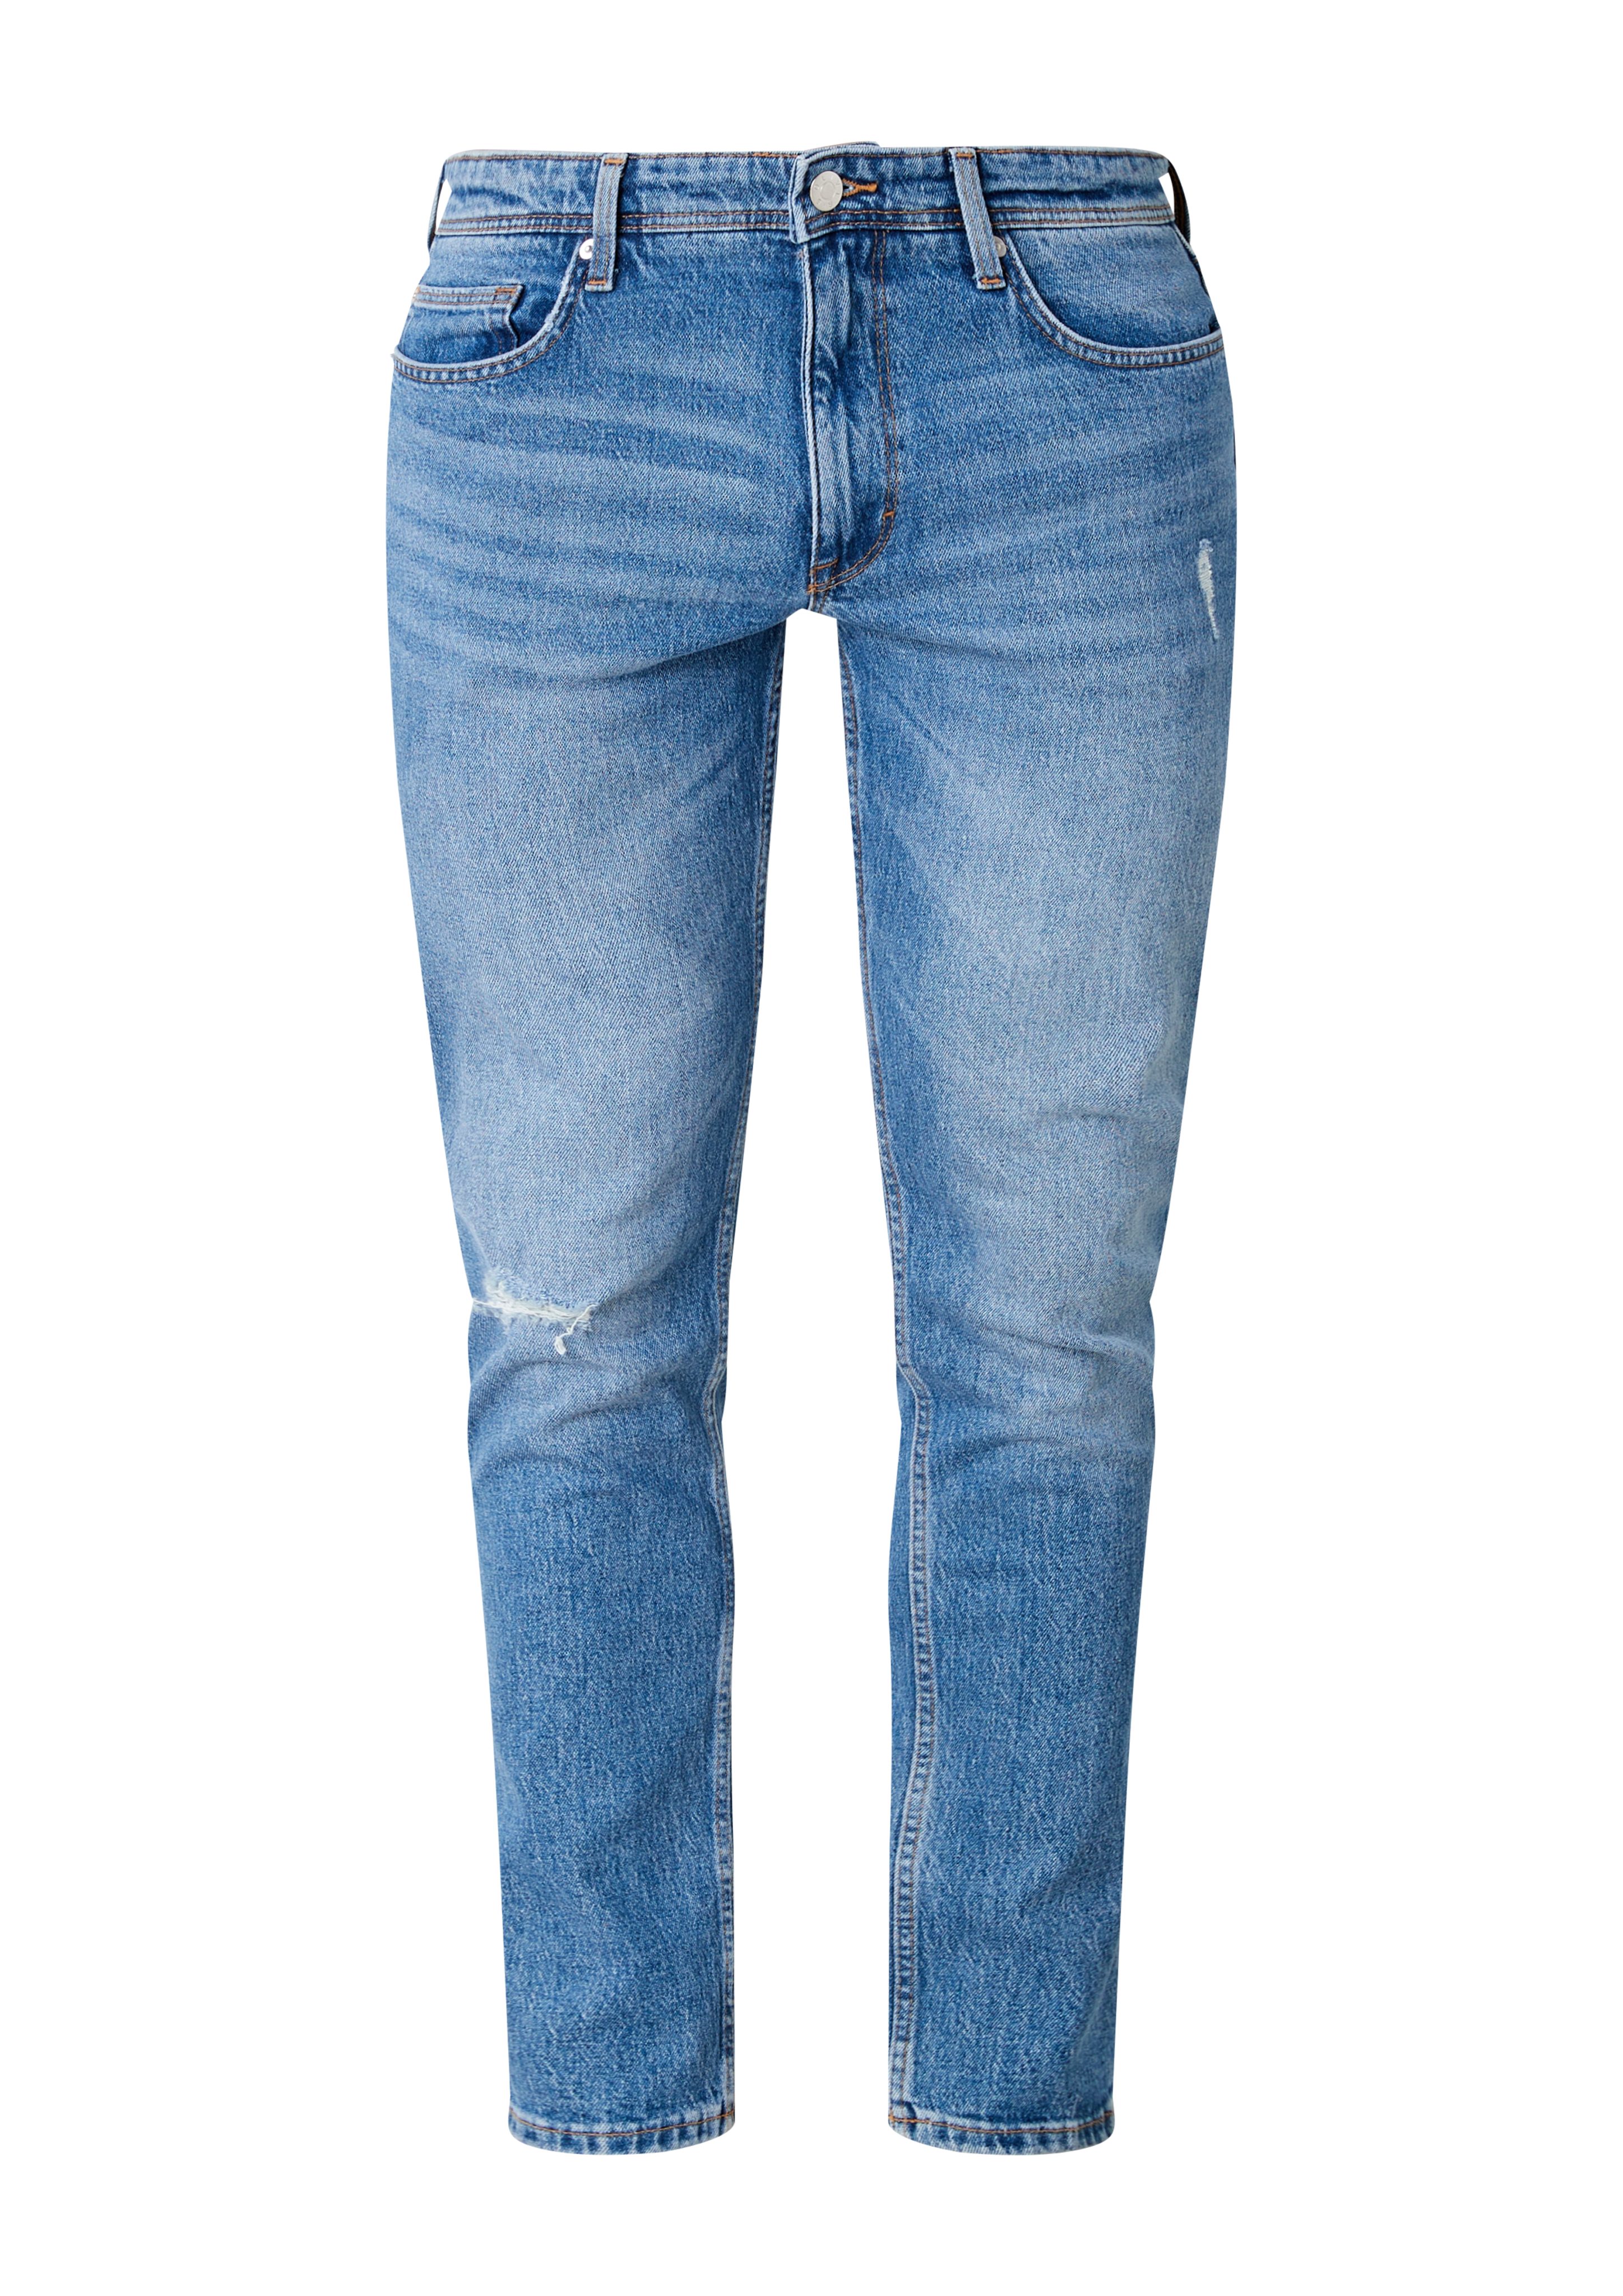 s.Oliver Stoffhose Jeans York ozeanblau Leg Destroyes, / Rise Regular / Fit Straight Waschung, Mid / Label-Patch